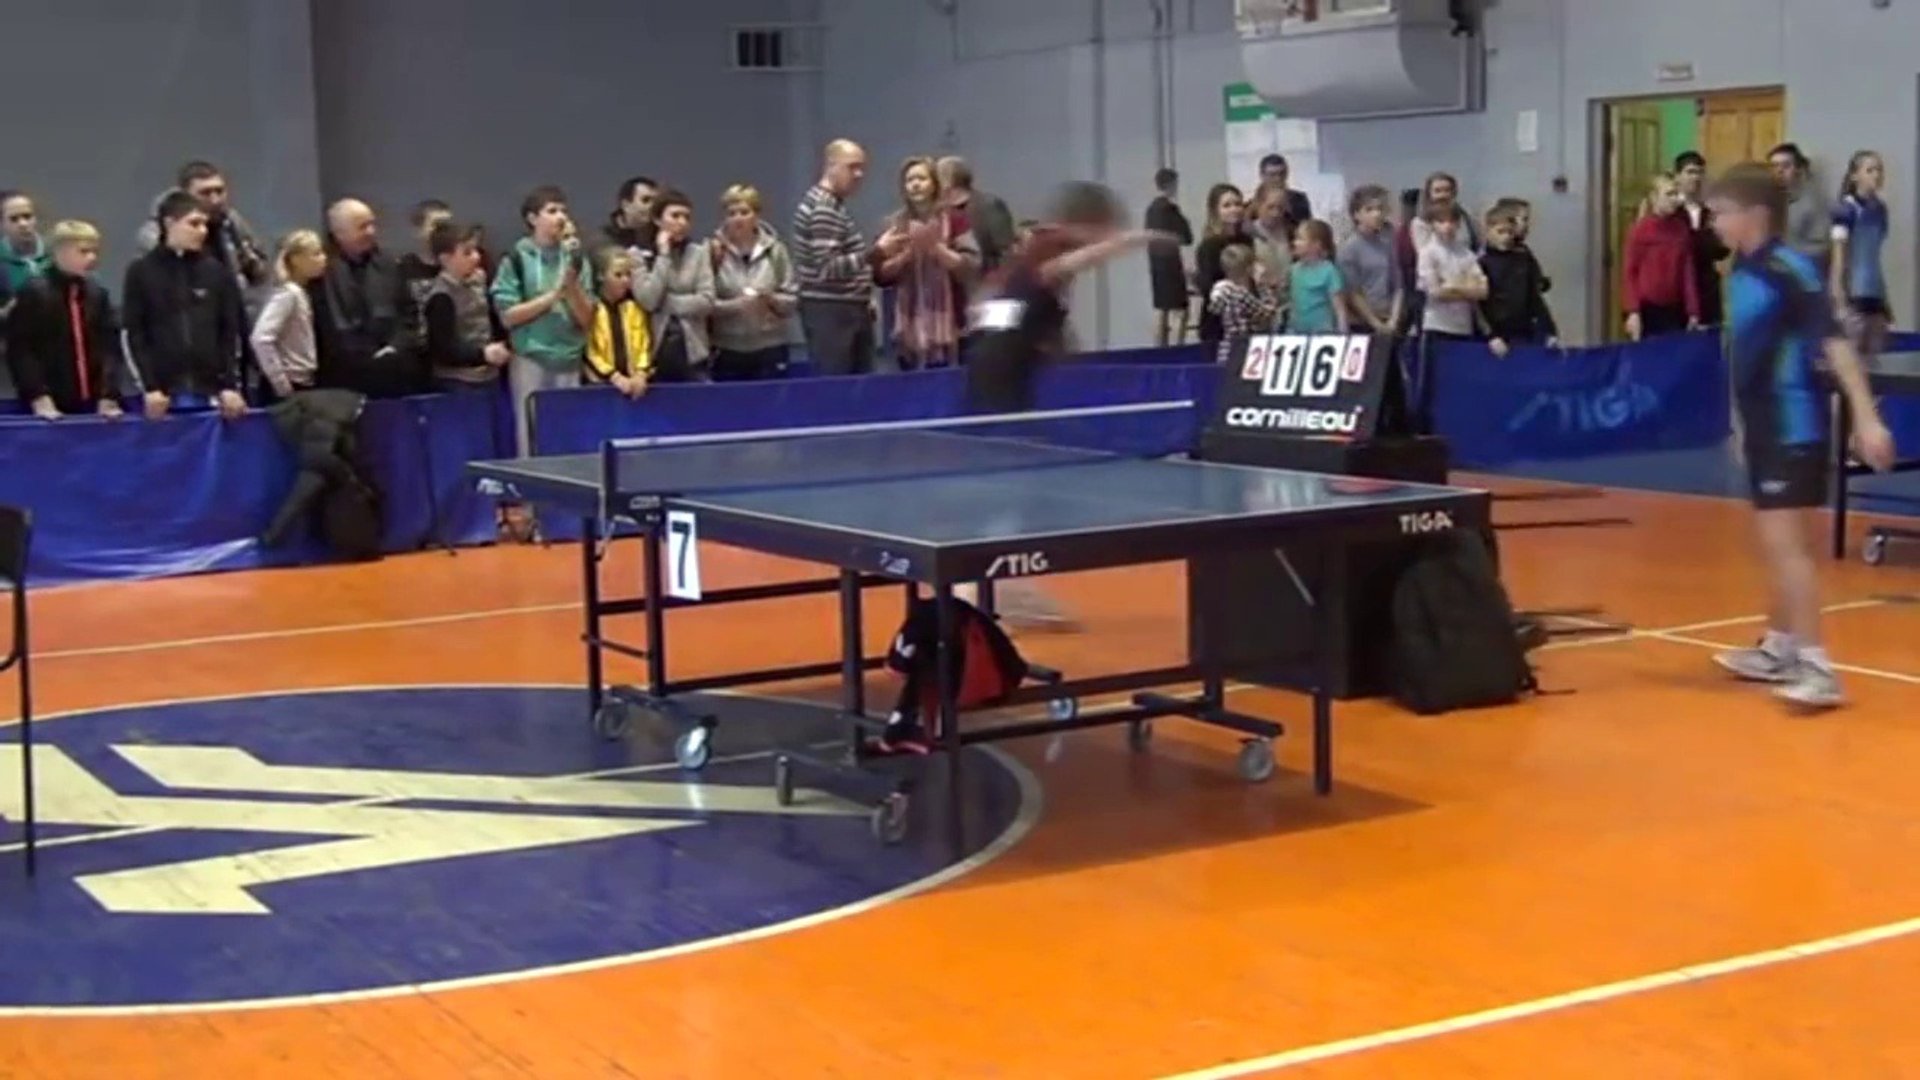 Violence in Table Tennis : Child loses table tennis match, pushes referee  out of his chair - Vidéo Dailymotion